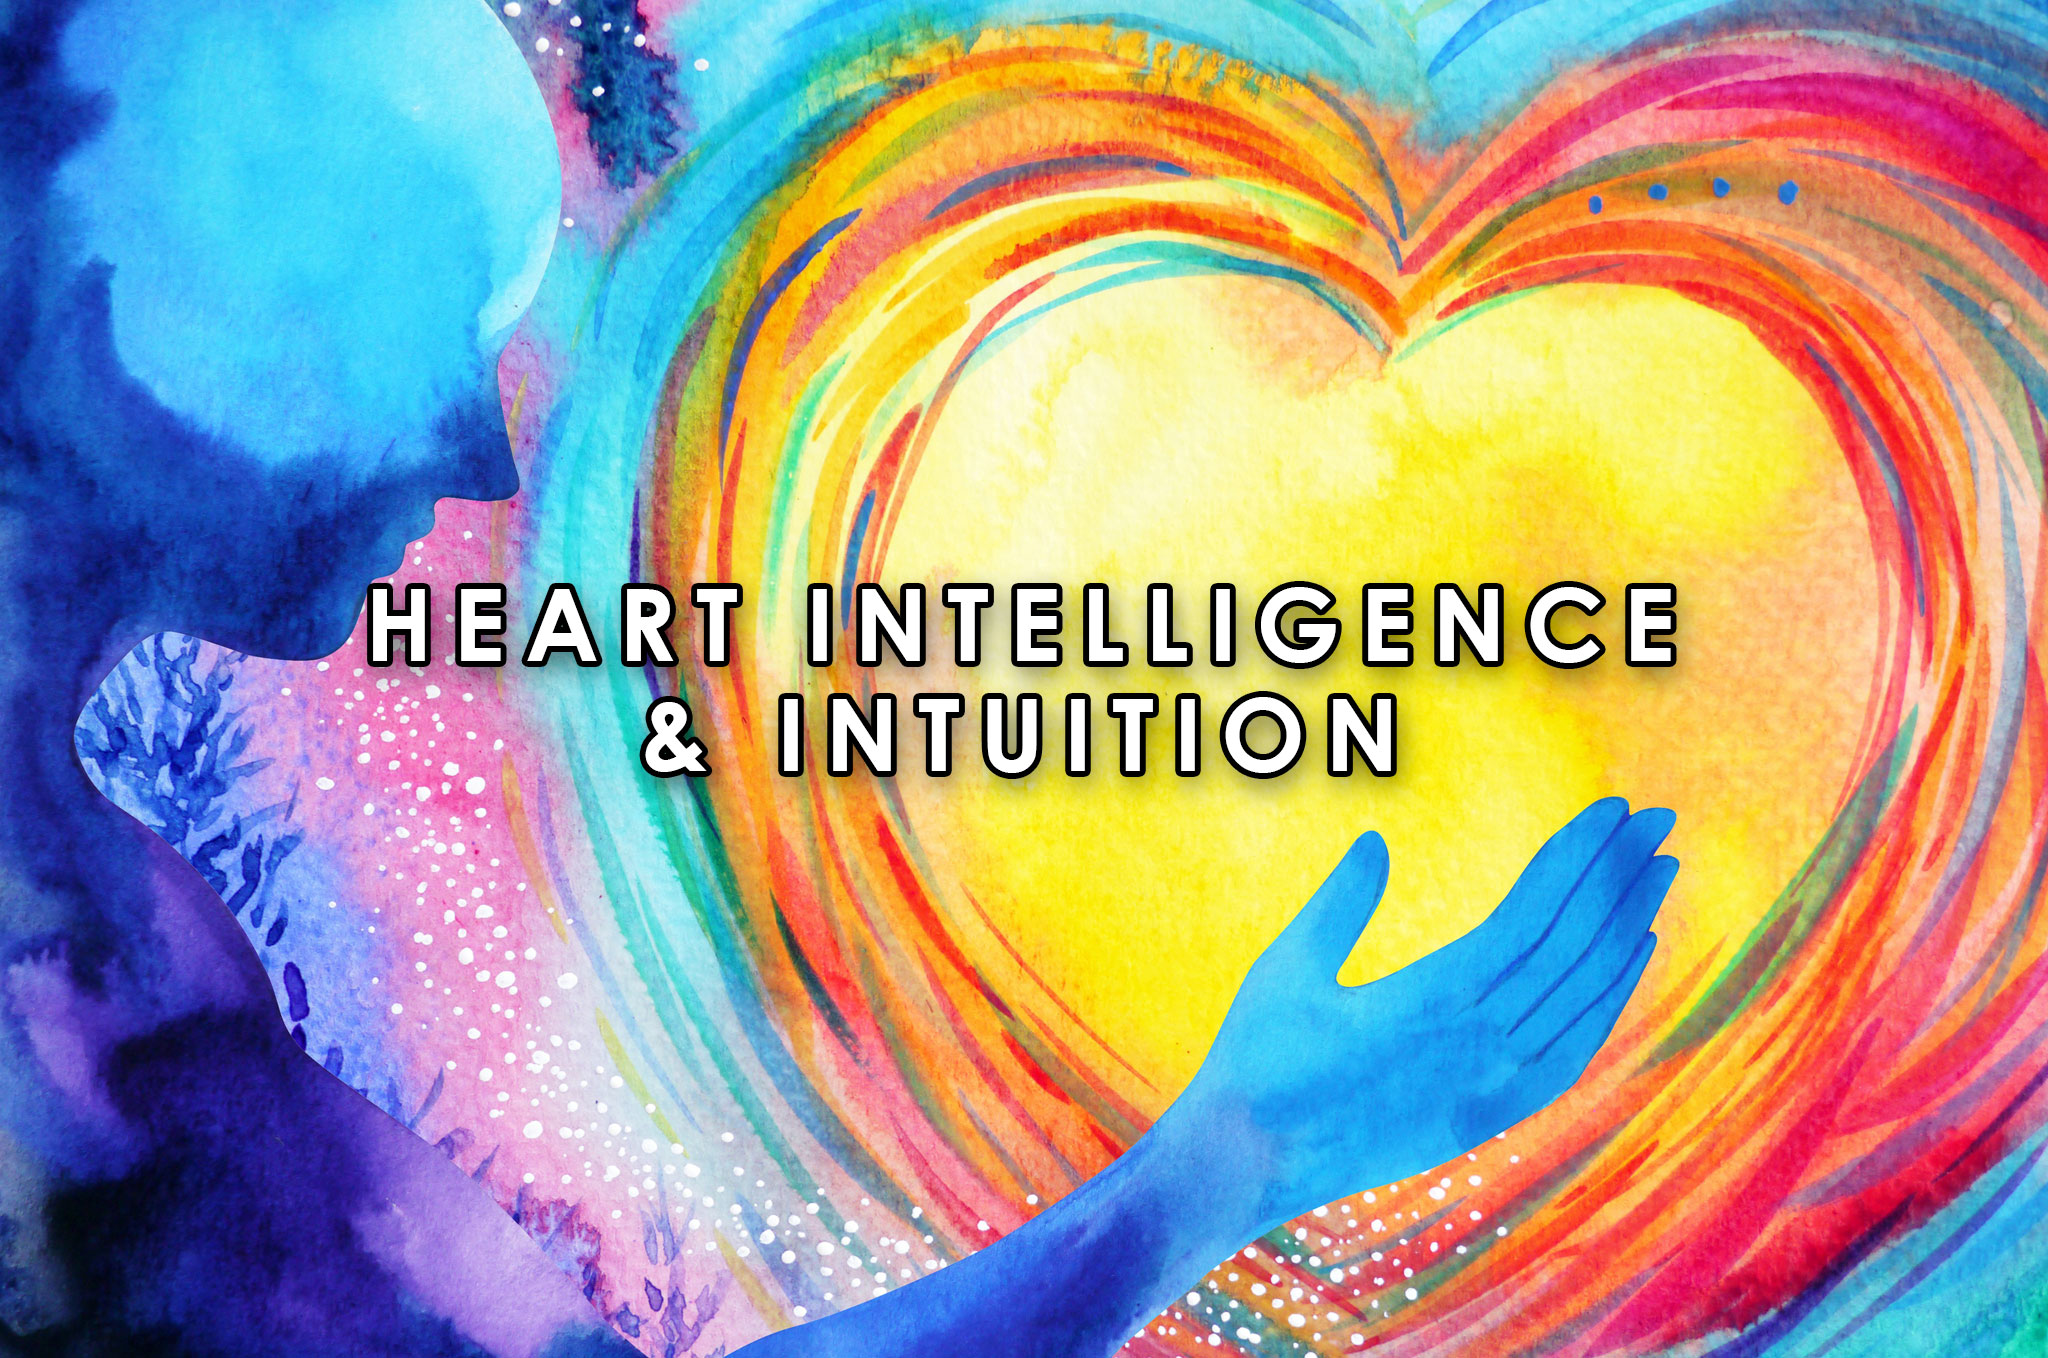 Heart Intelligence & Intuition | HeartFirst Education Core Value